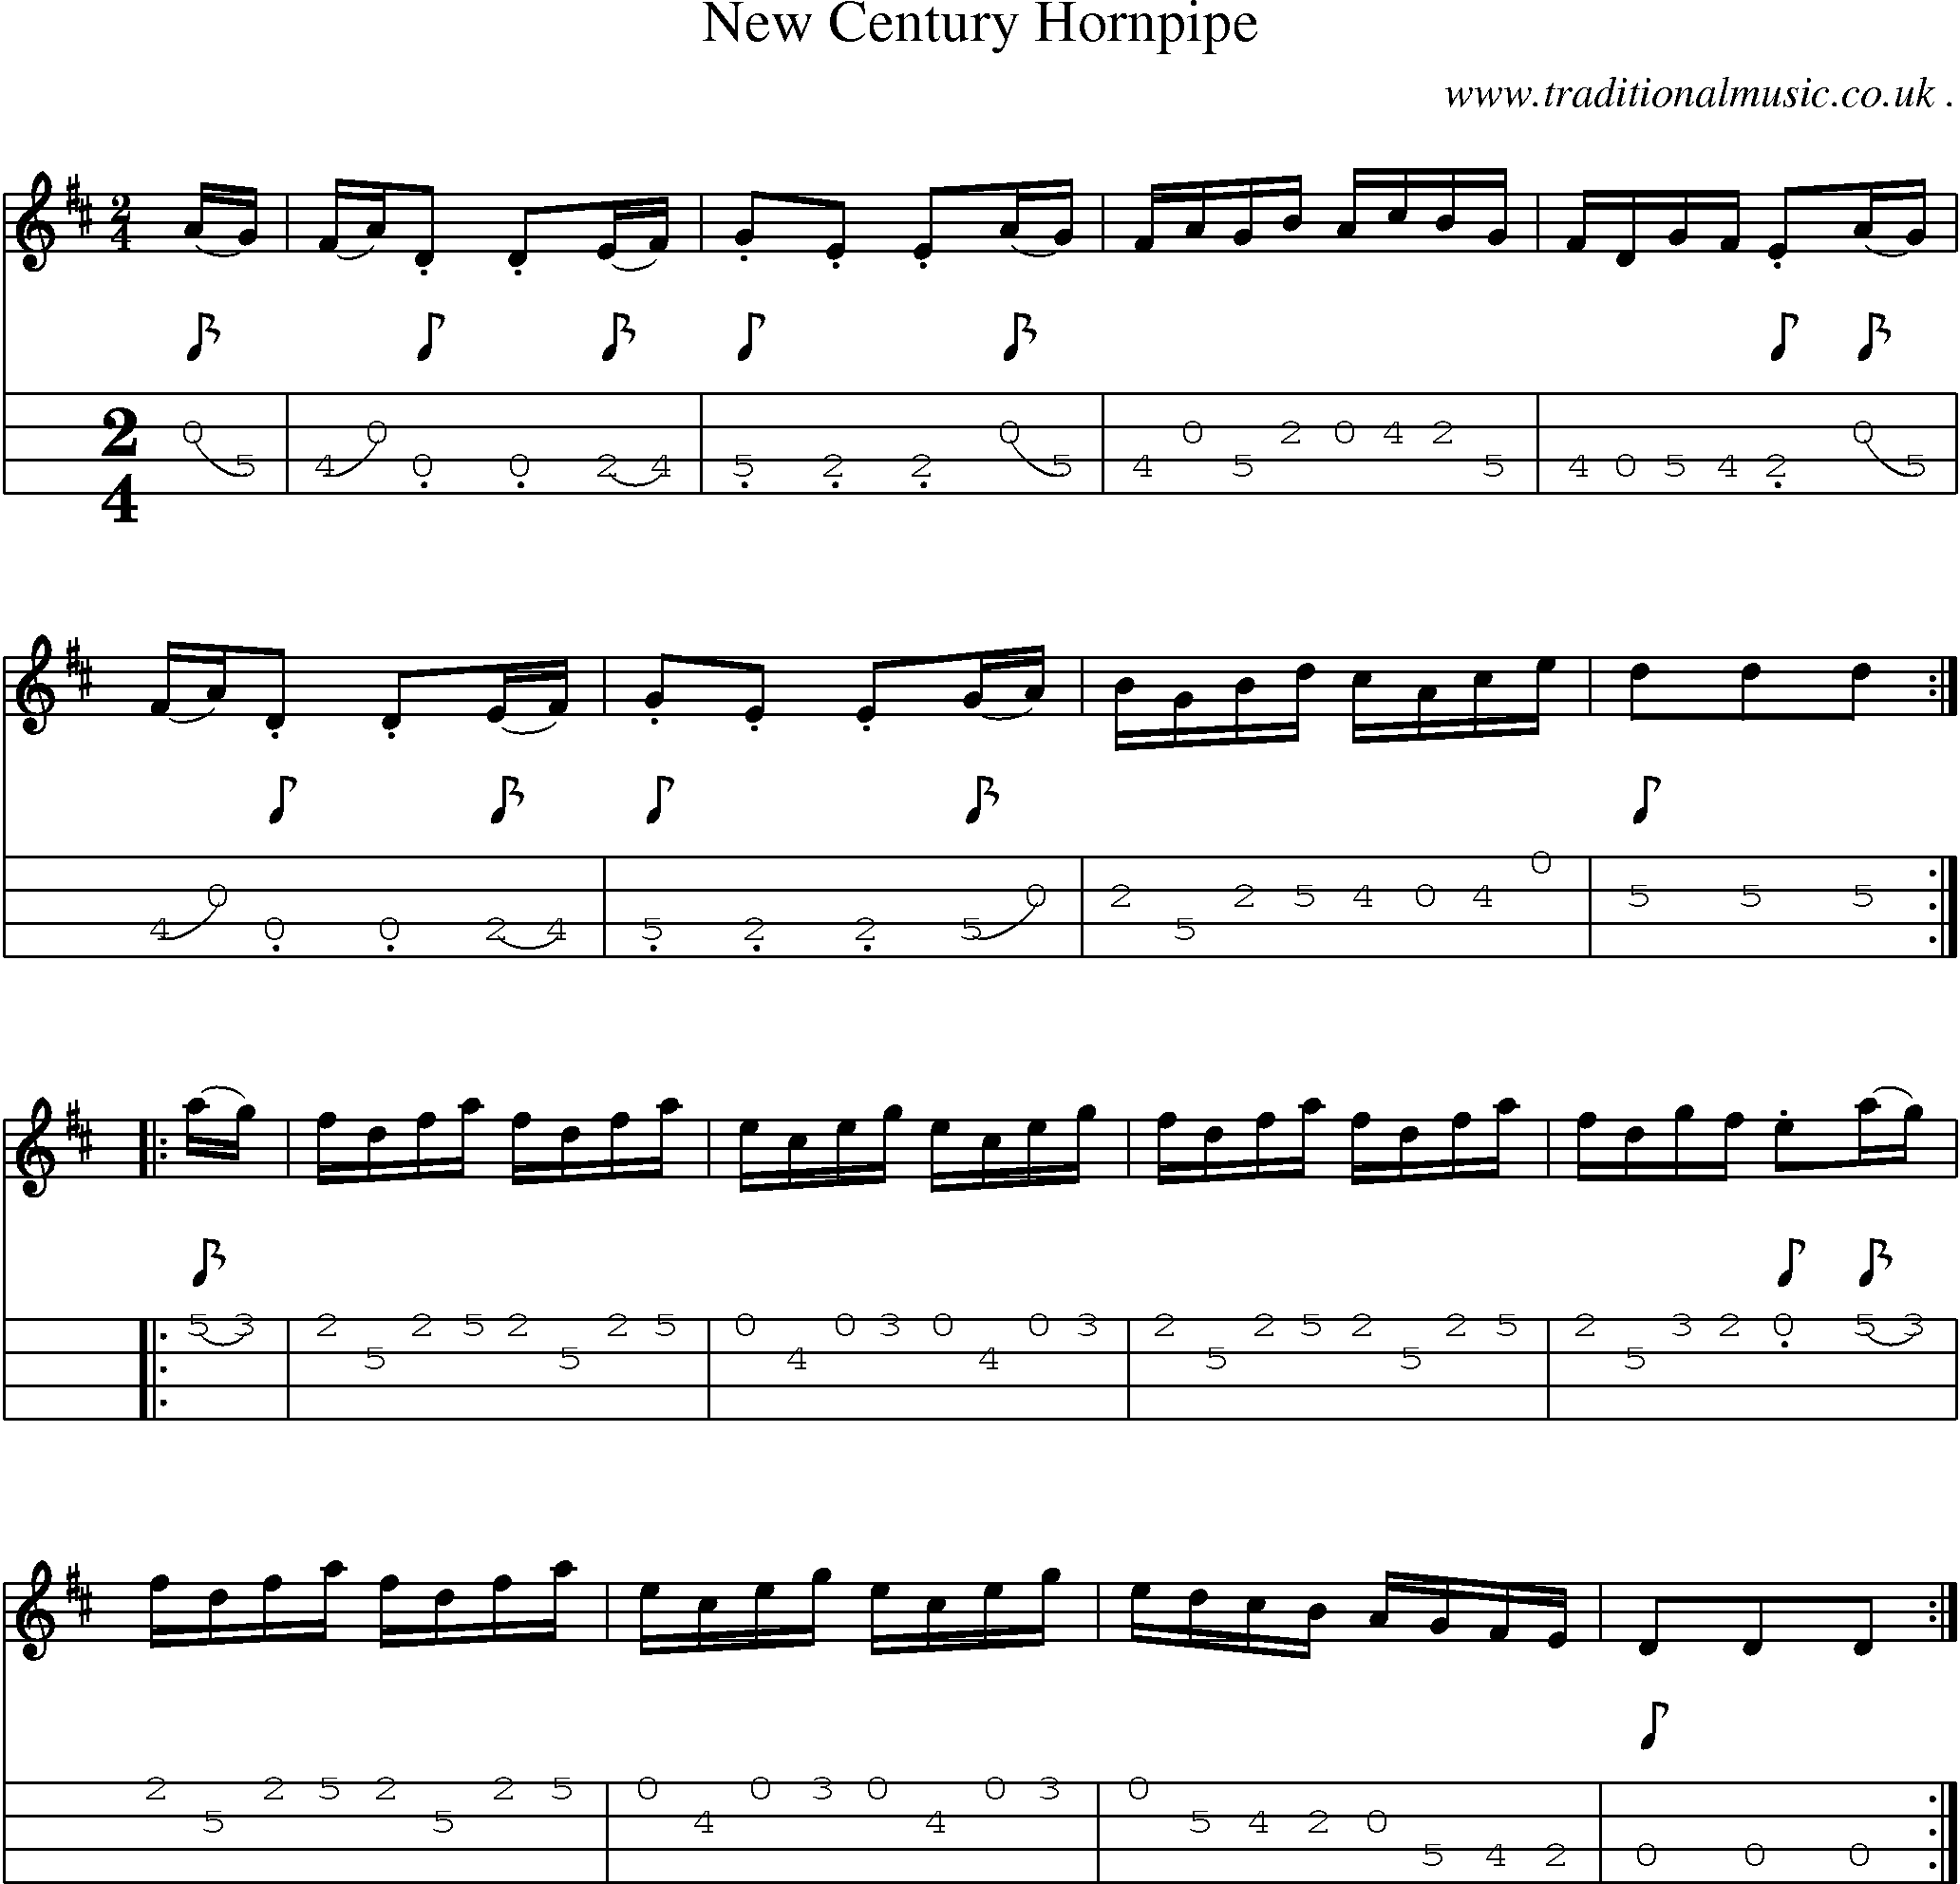 Sheet-Music and Mandolin Tabs for New Century Hornpipe